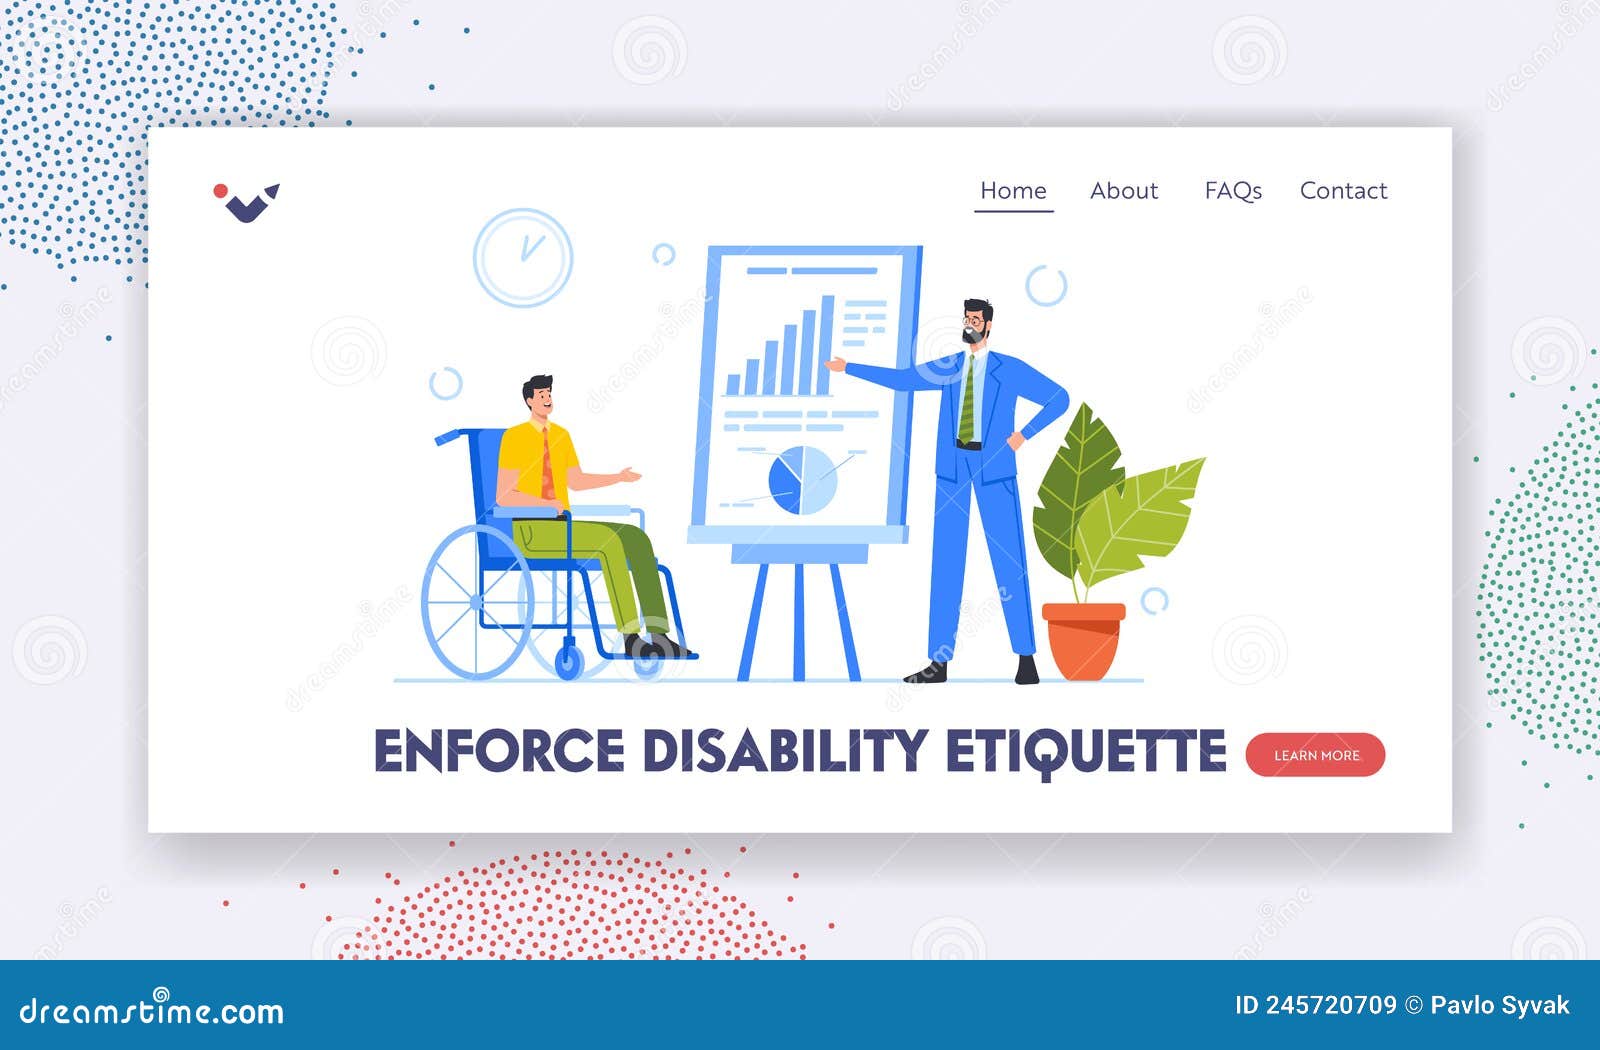 enforce disability etiquette landing page template. disabled business man on wheelchair watch seminar presentation